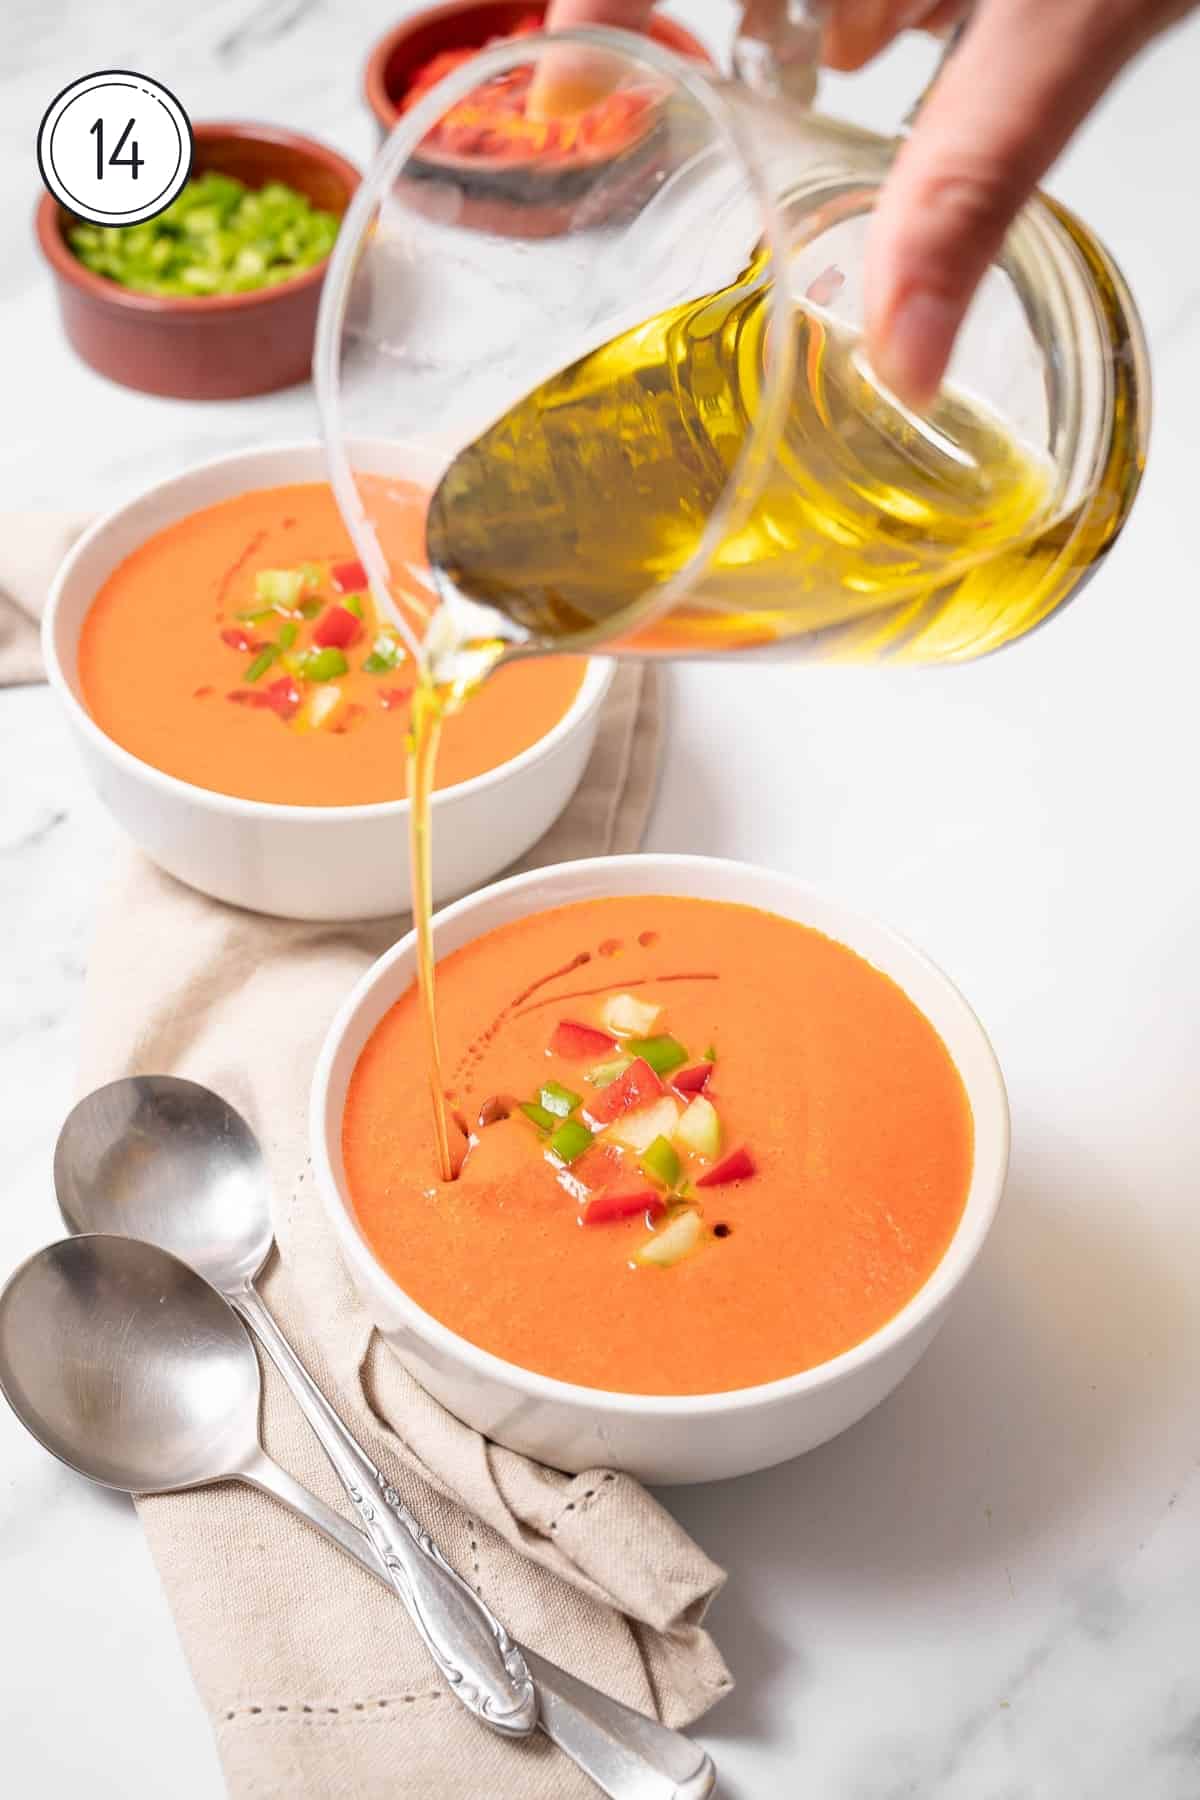 Step 14 gazpacho recipe - a bowl of gazpacho with chopped veggies and a hand pouring olive oil. 